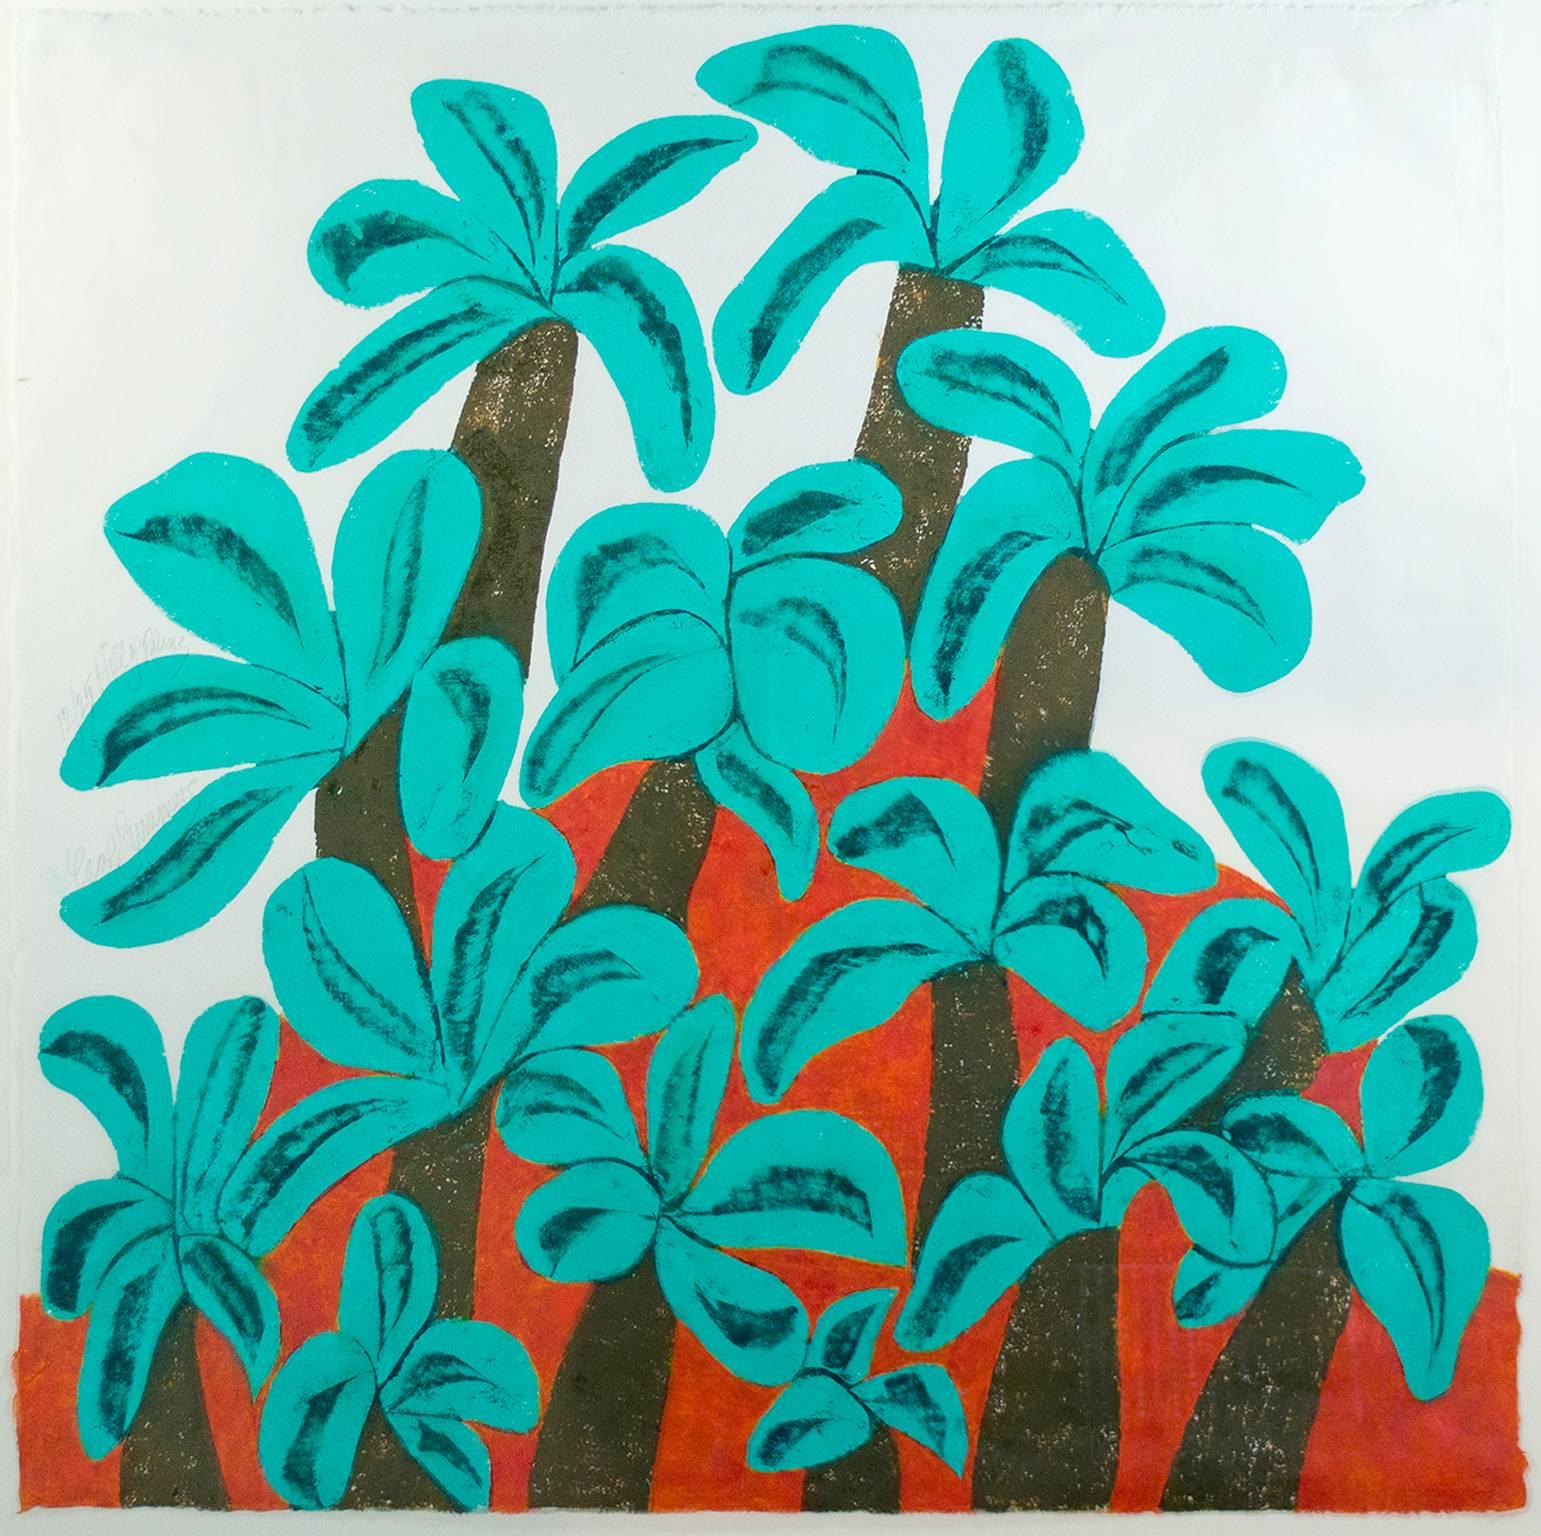 Carol Summers Landscape Print - "Hill of Palms, " Tropical Color Woodcut signed by Carol Summer